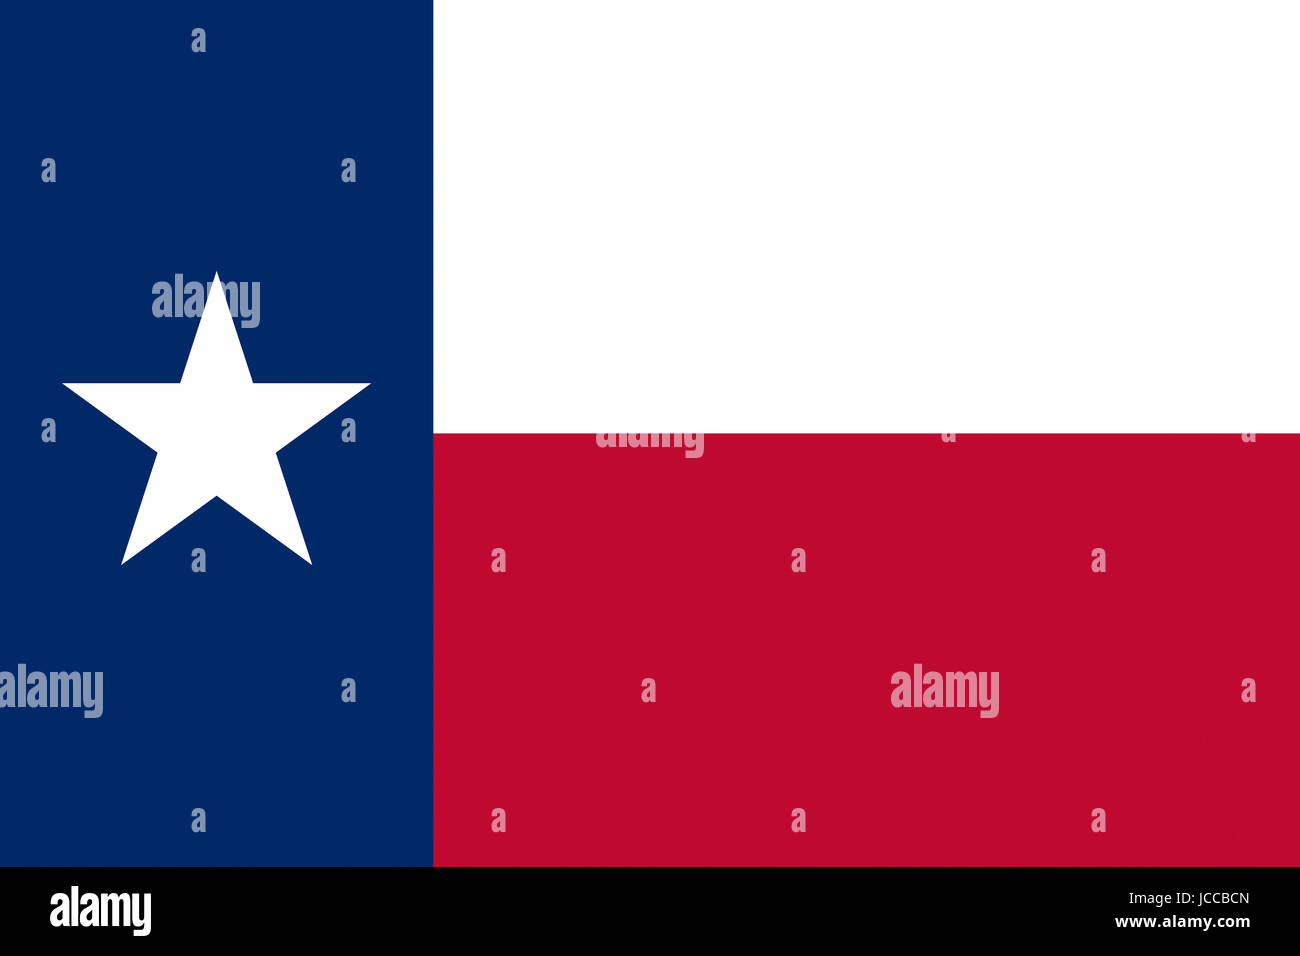 Illustration of the flag of Texas state in America Stock Photo